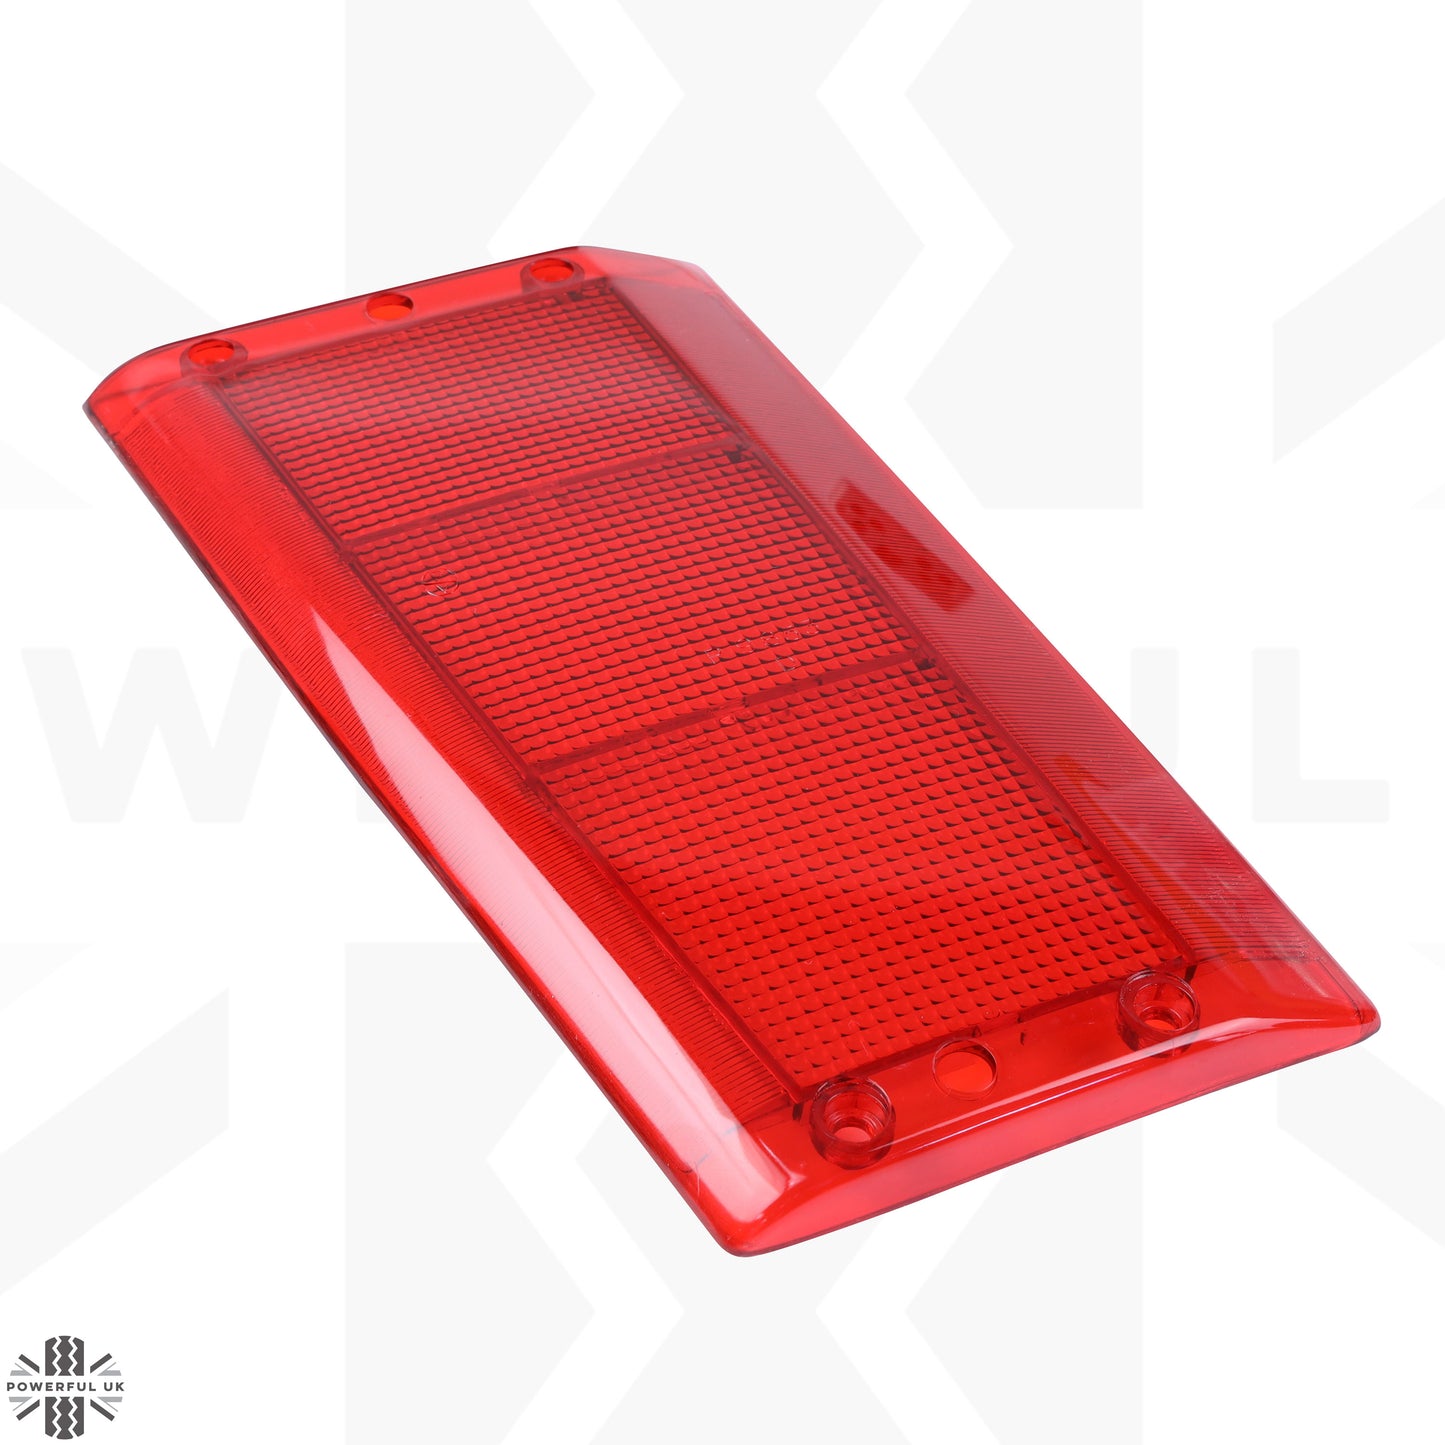 Rear Light Lens for Range Rover Classic - Side Section - Clear Edge - Right Side